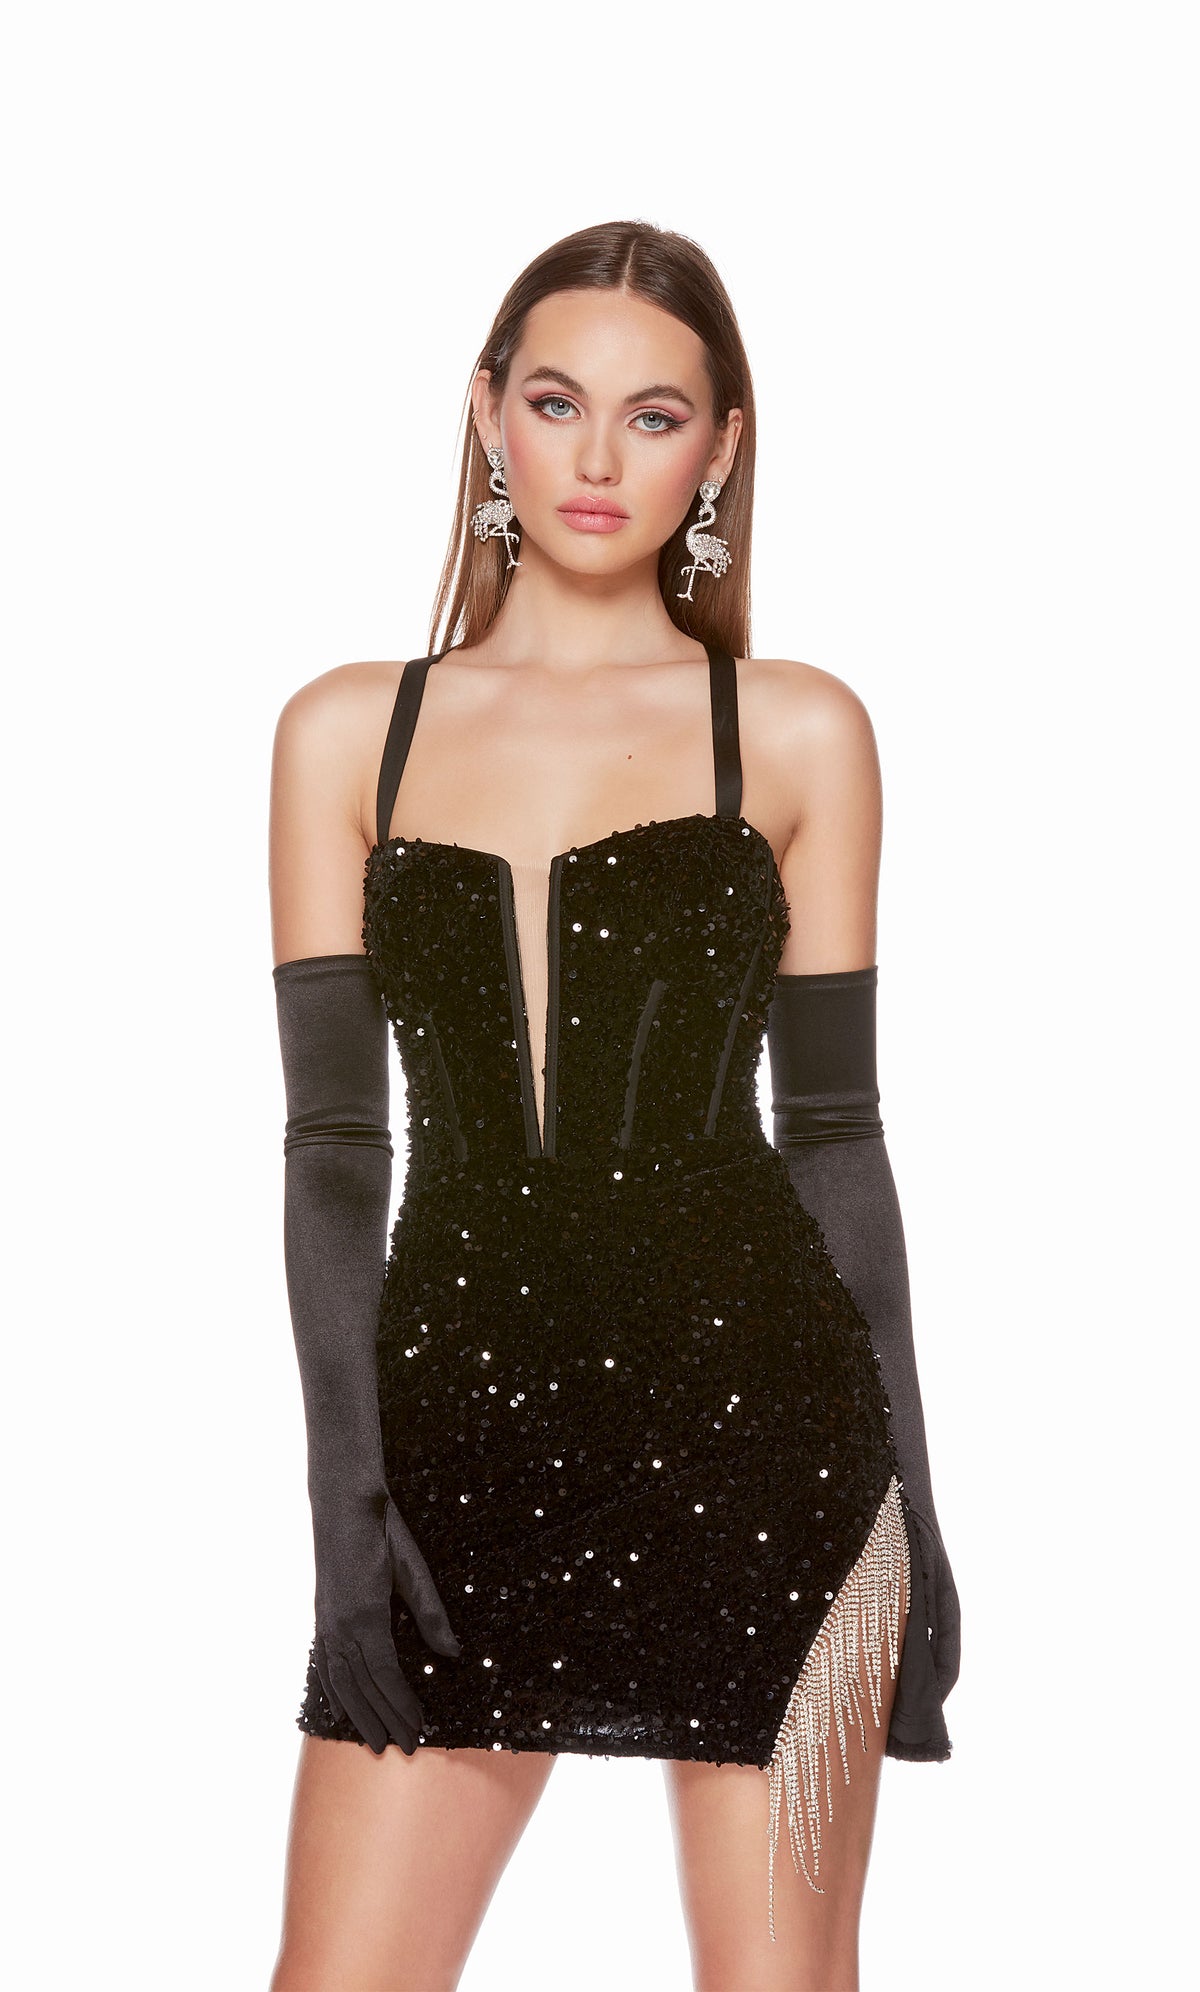 A playful, plunging neckline black sequin corset dress highlighting a side slit adorned with sparkly silver fringe and a lace-up back, for the perfect fit. The dress was accessorized with long black satin gloves which are not included with dress purchase.